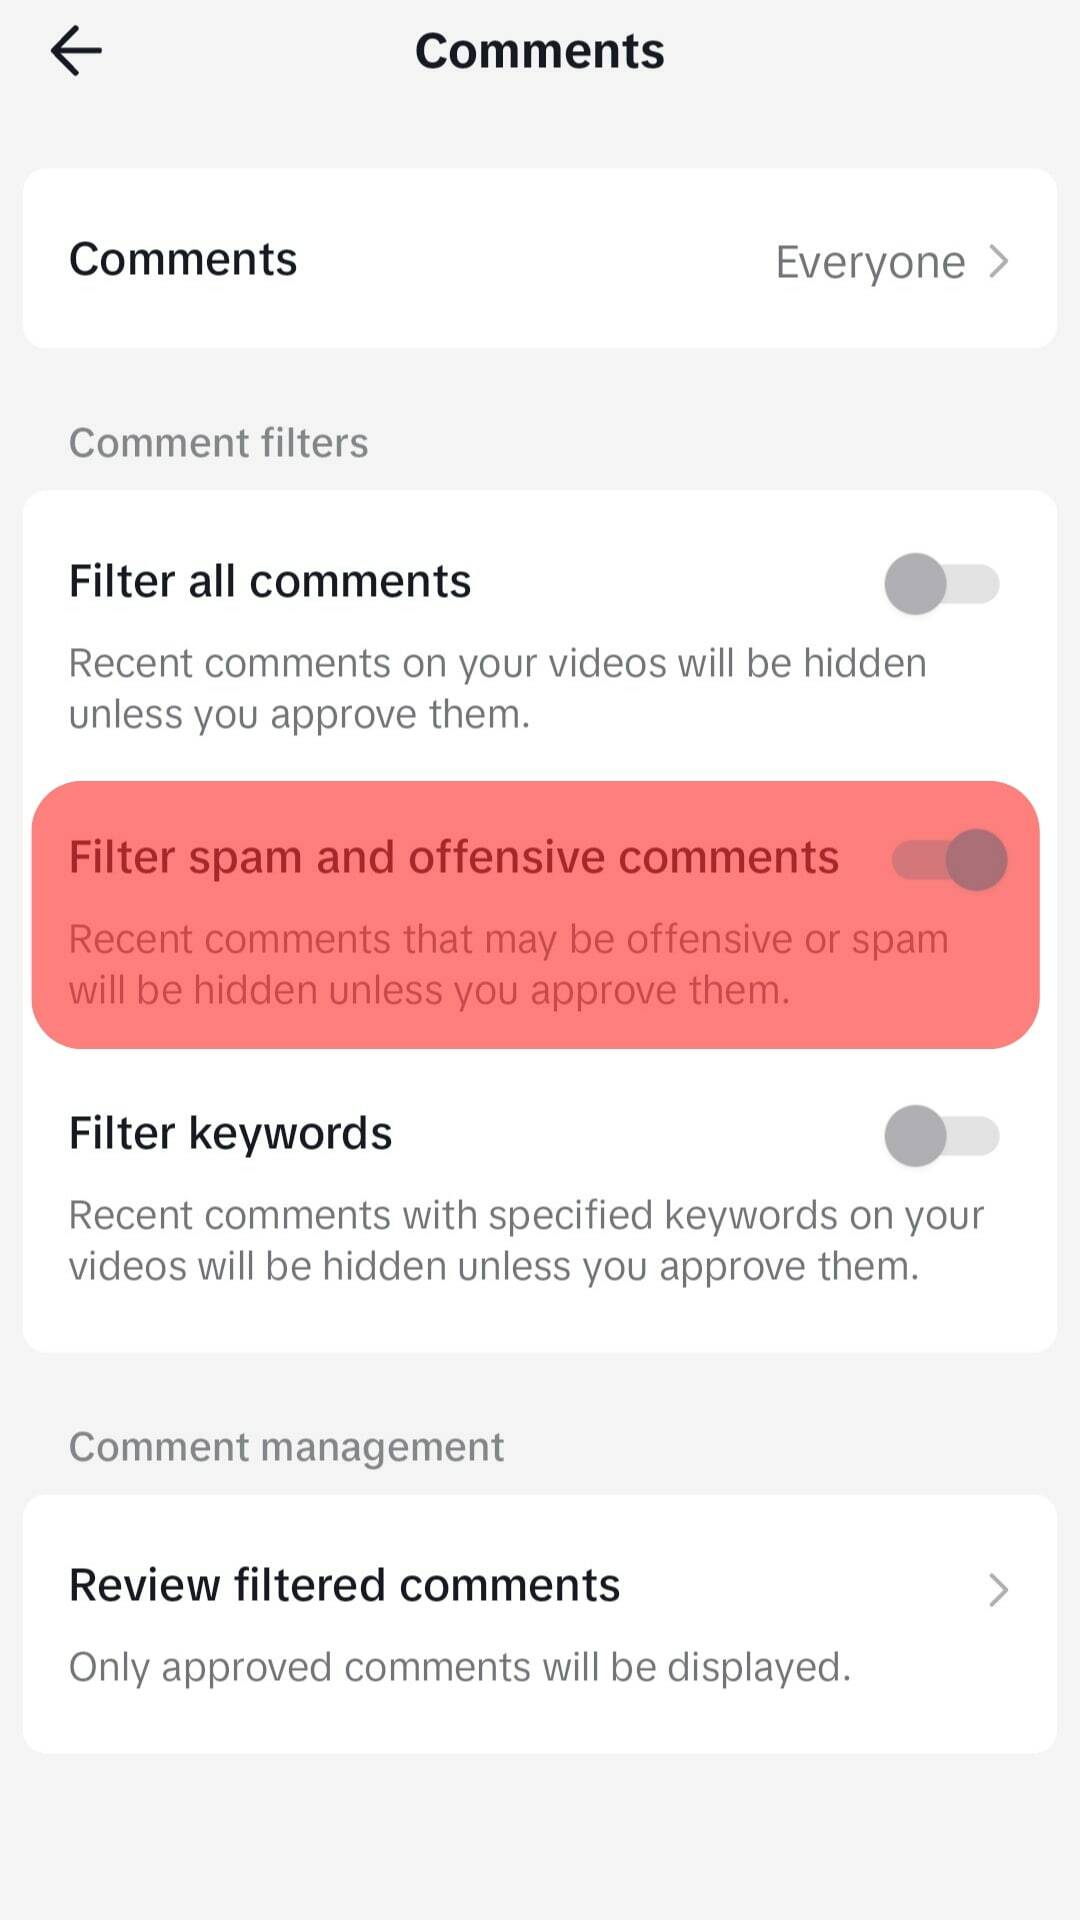 Filter Spam And Offensive Comments Option.